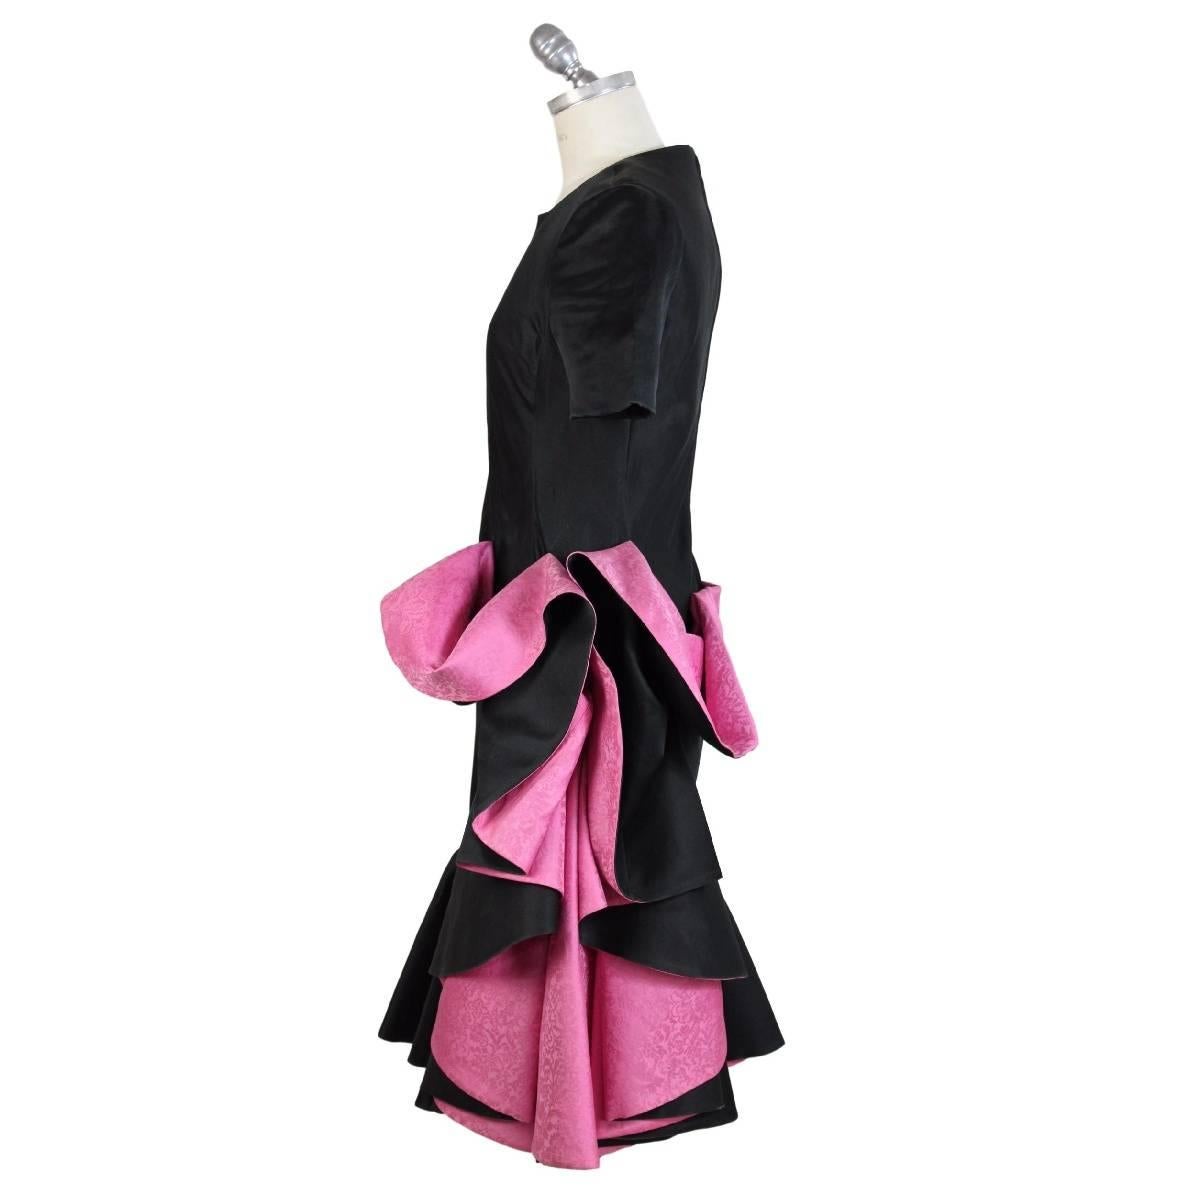 Roberto Capucci vintage silk black and fuchsia dress, cocktail dress length on the knee, short sleeve, crew neck, the skirt with fuchsia draping in silk shantung, zip closure on the back, size 42 it, made in italy, excellent condition.

Size 42